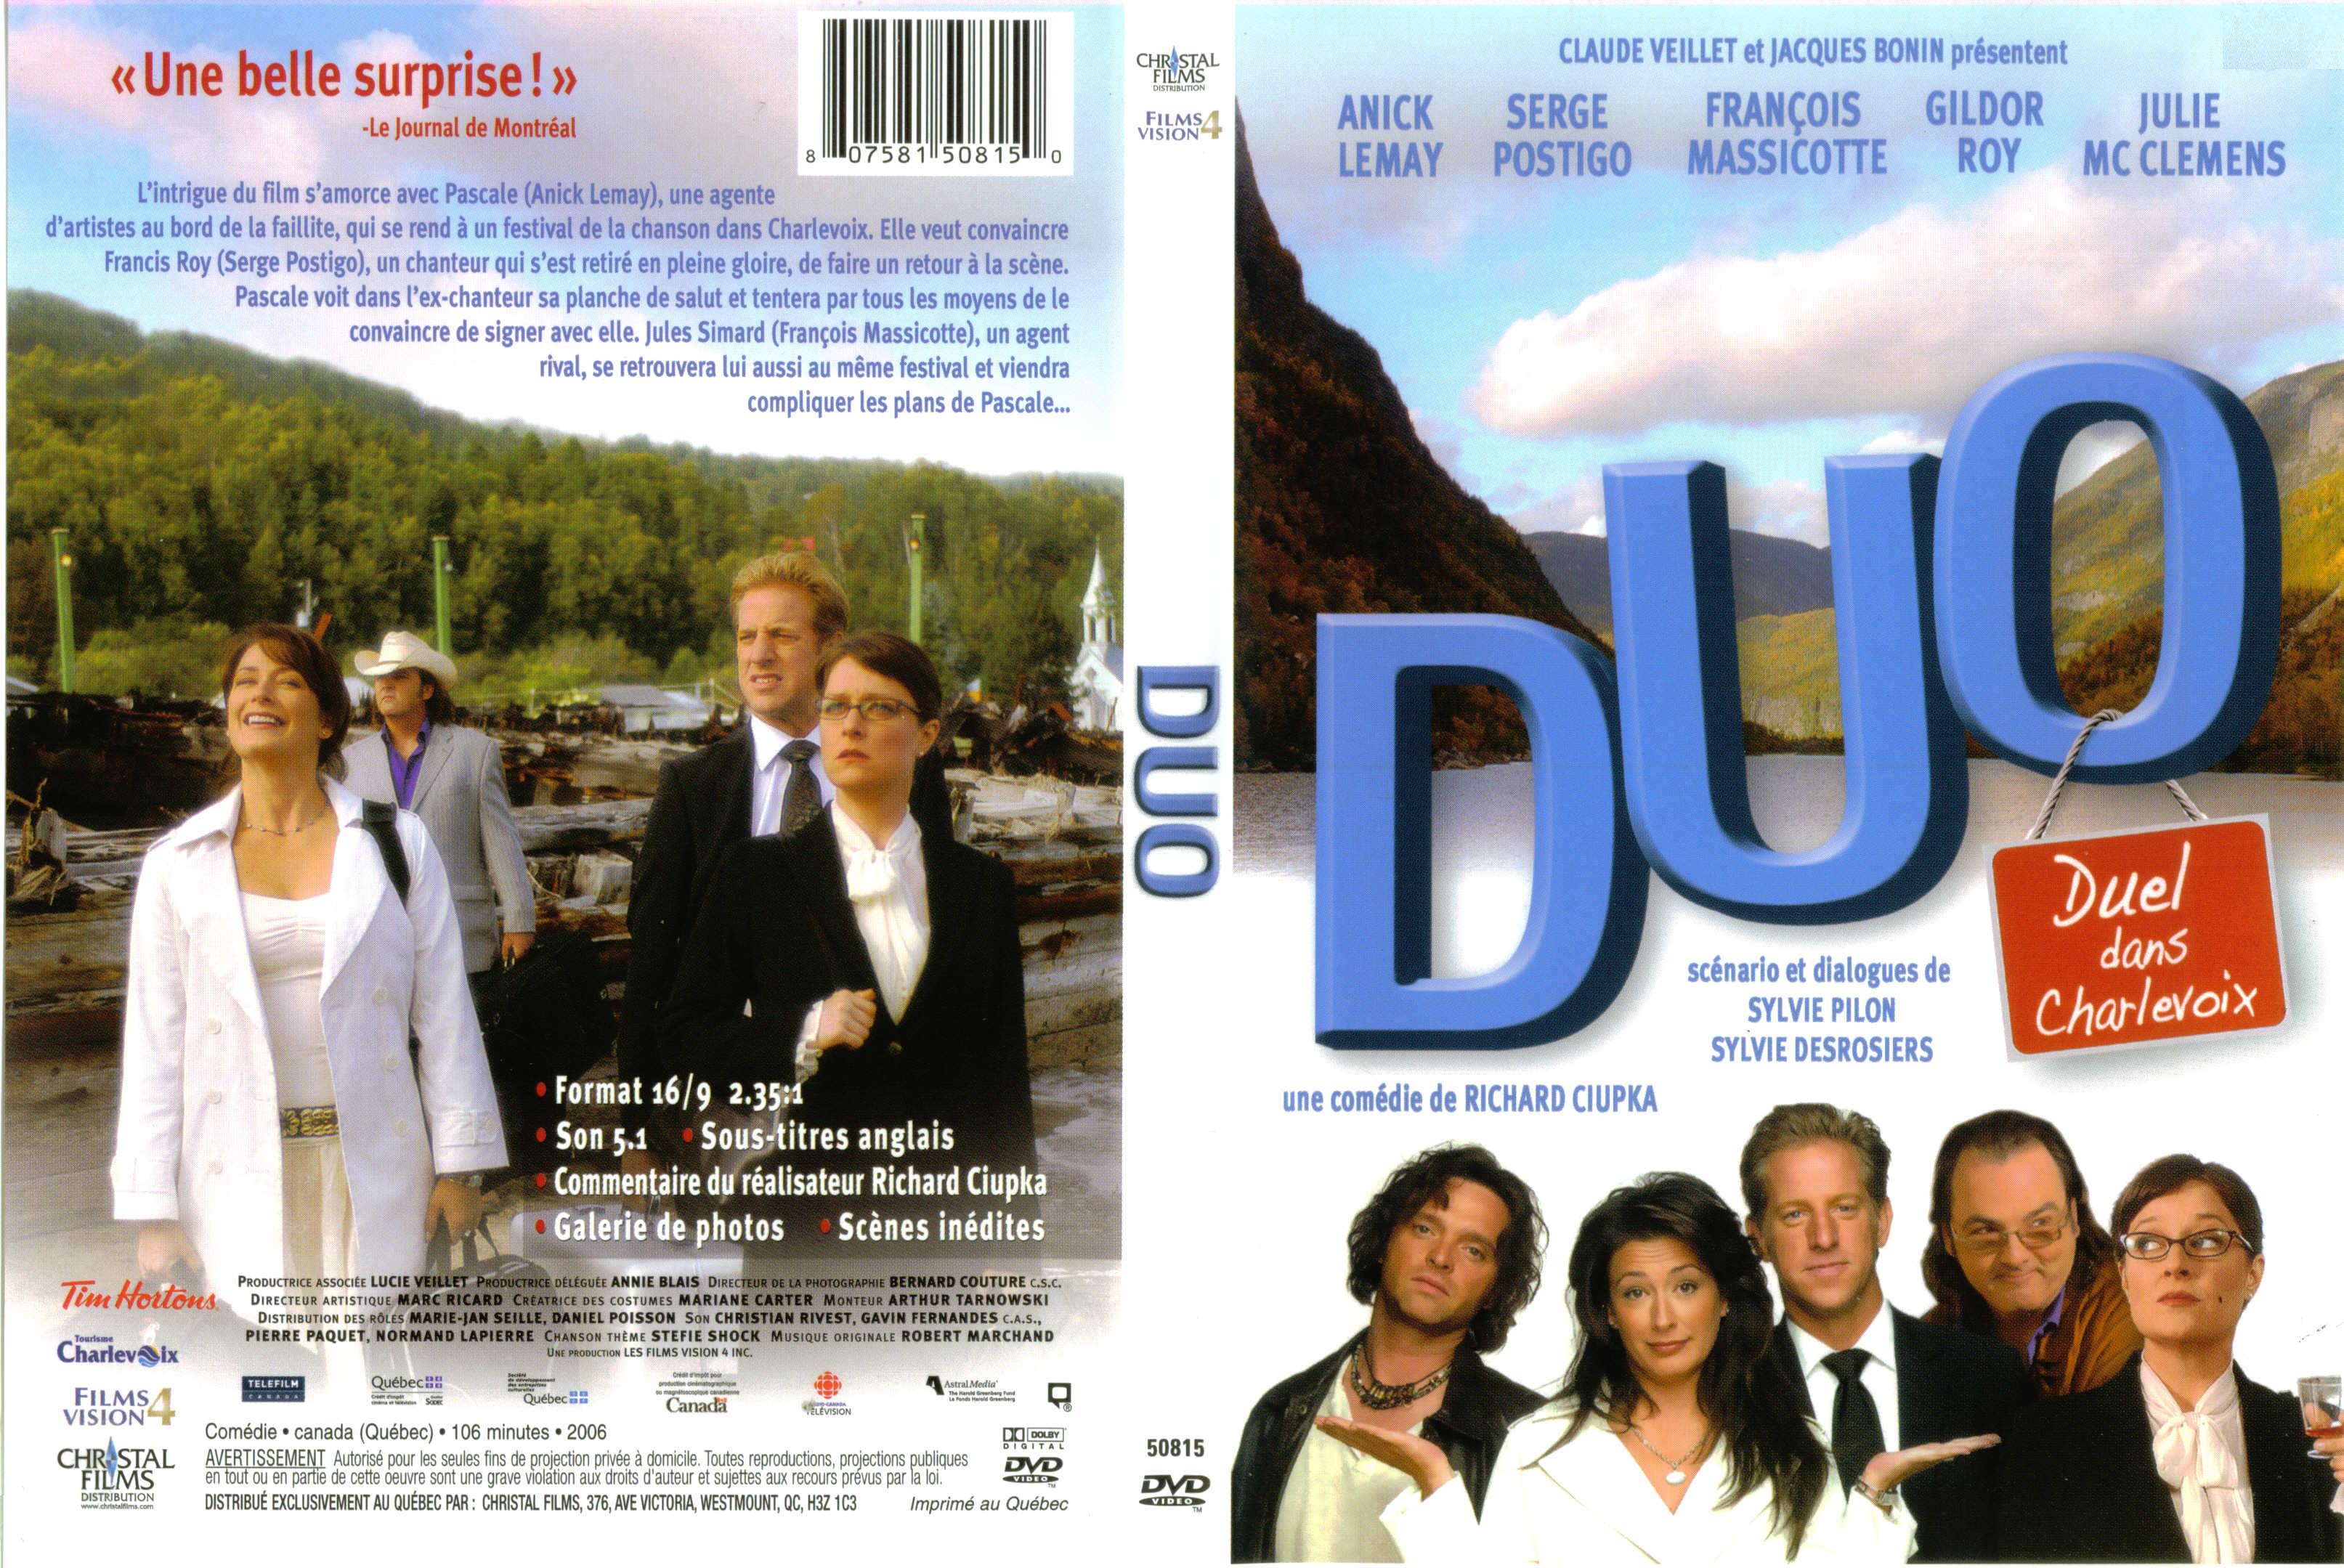 Jaquette DVD Duo